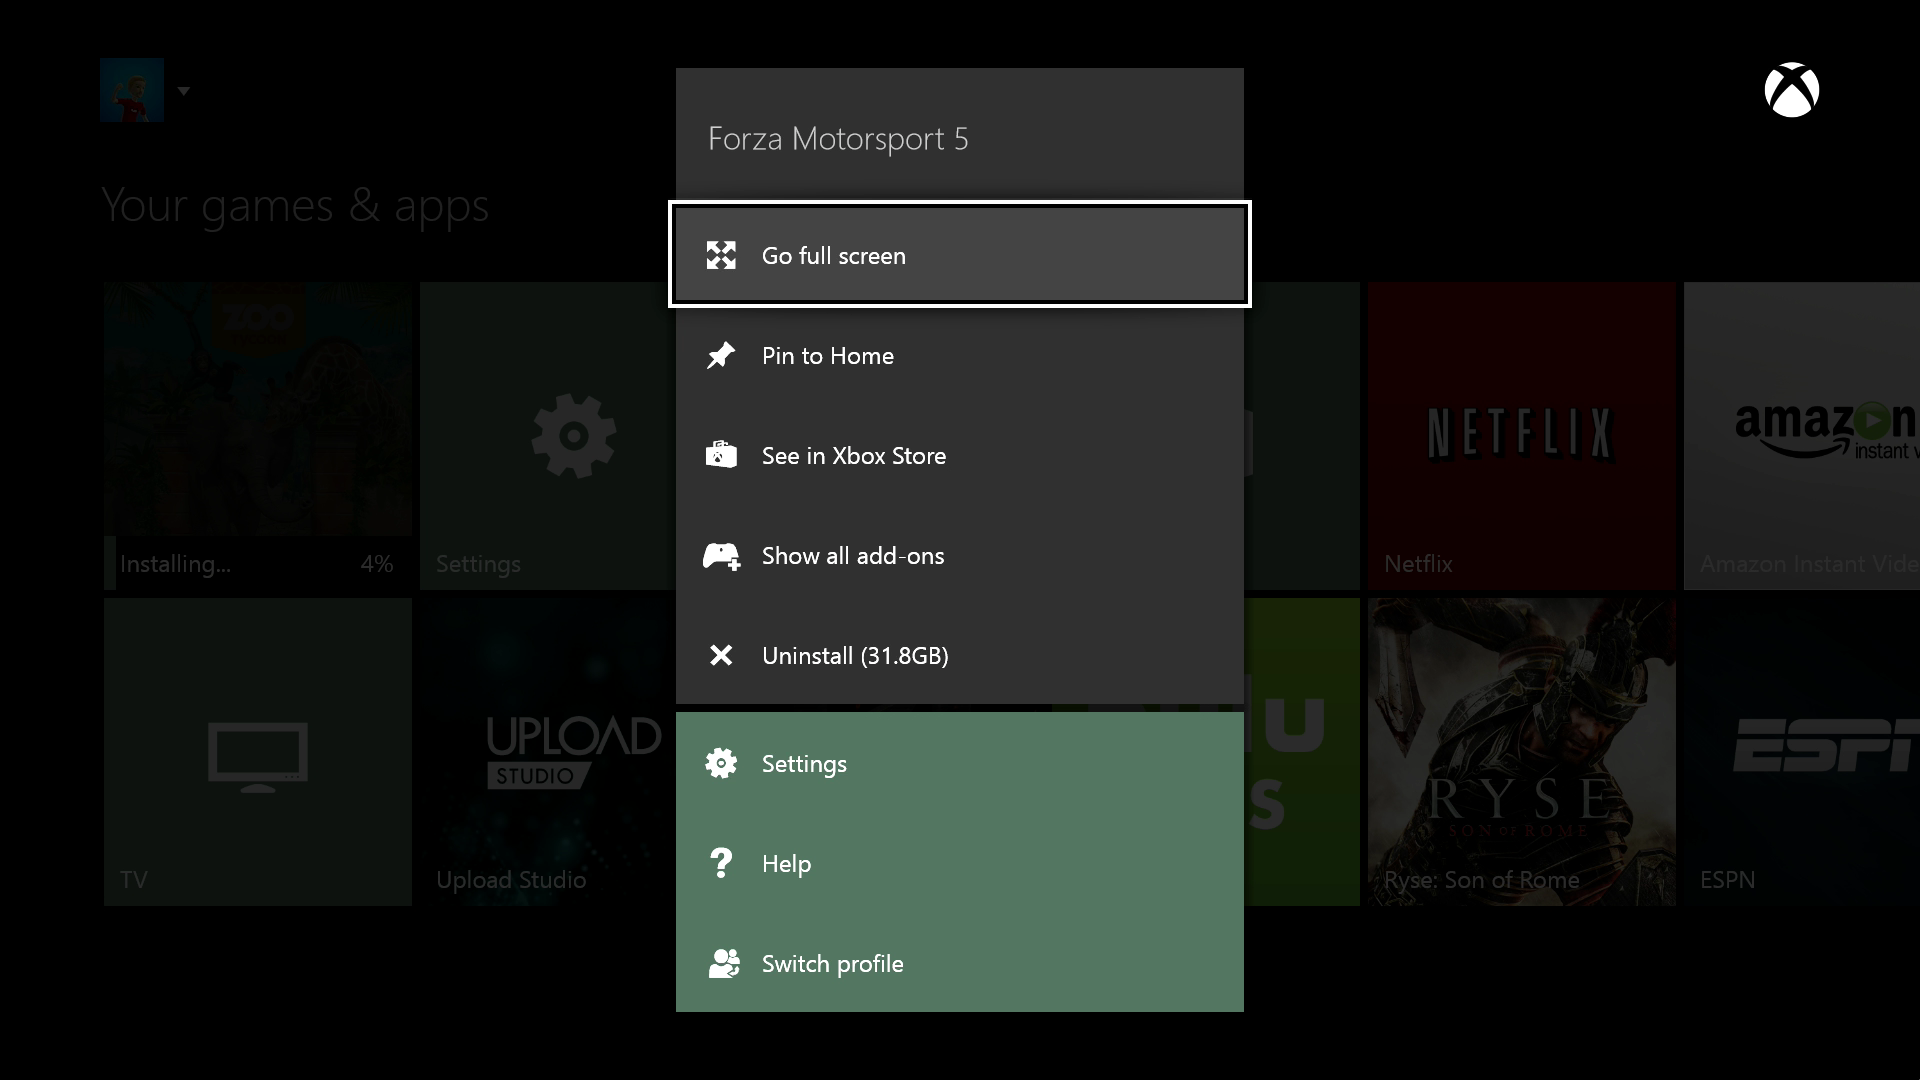 Uninstall Games and Apps on the Xbox One - CCM